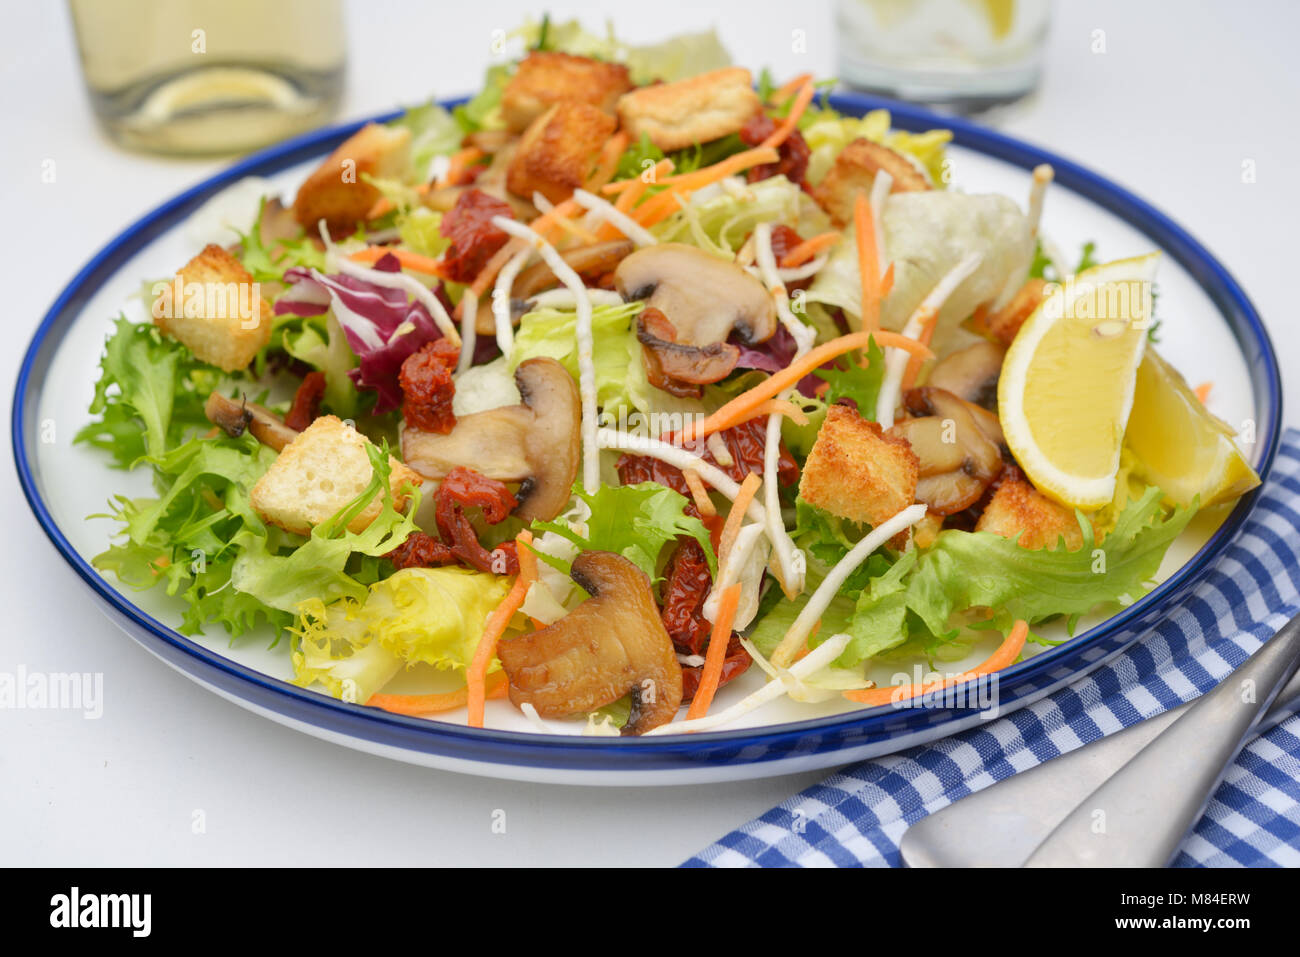 Salad with lettuce, roasted mushrooms, croutons, dried tomatoes, and lemon Stock Photo